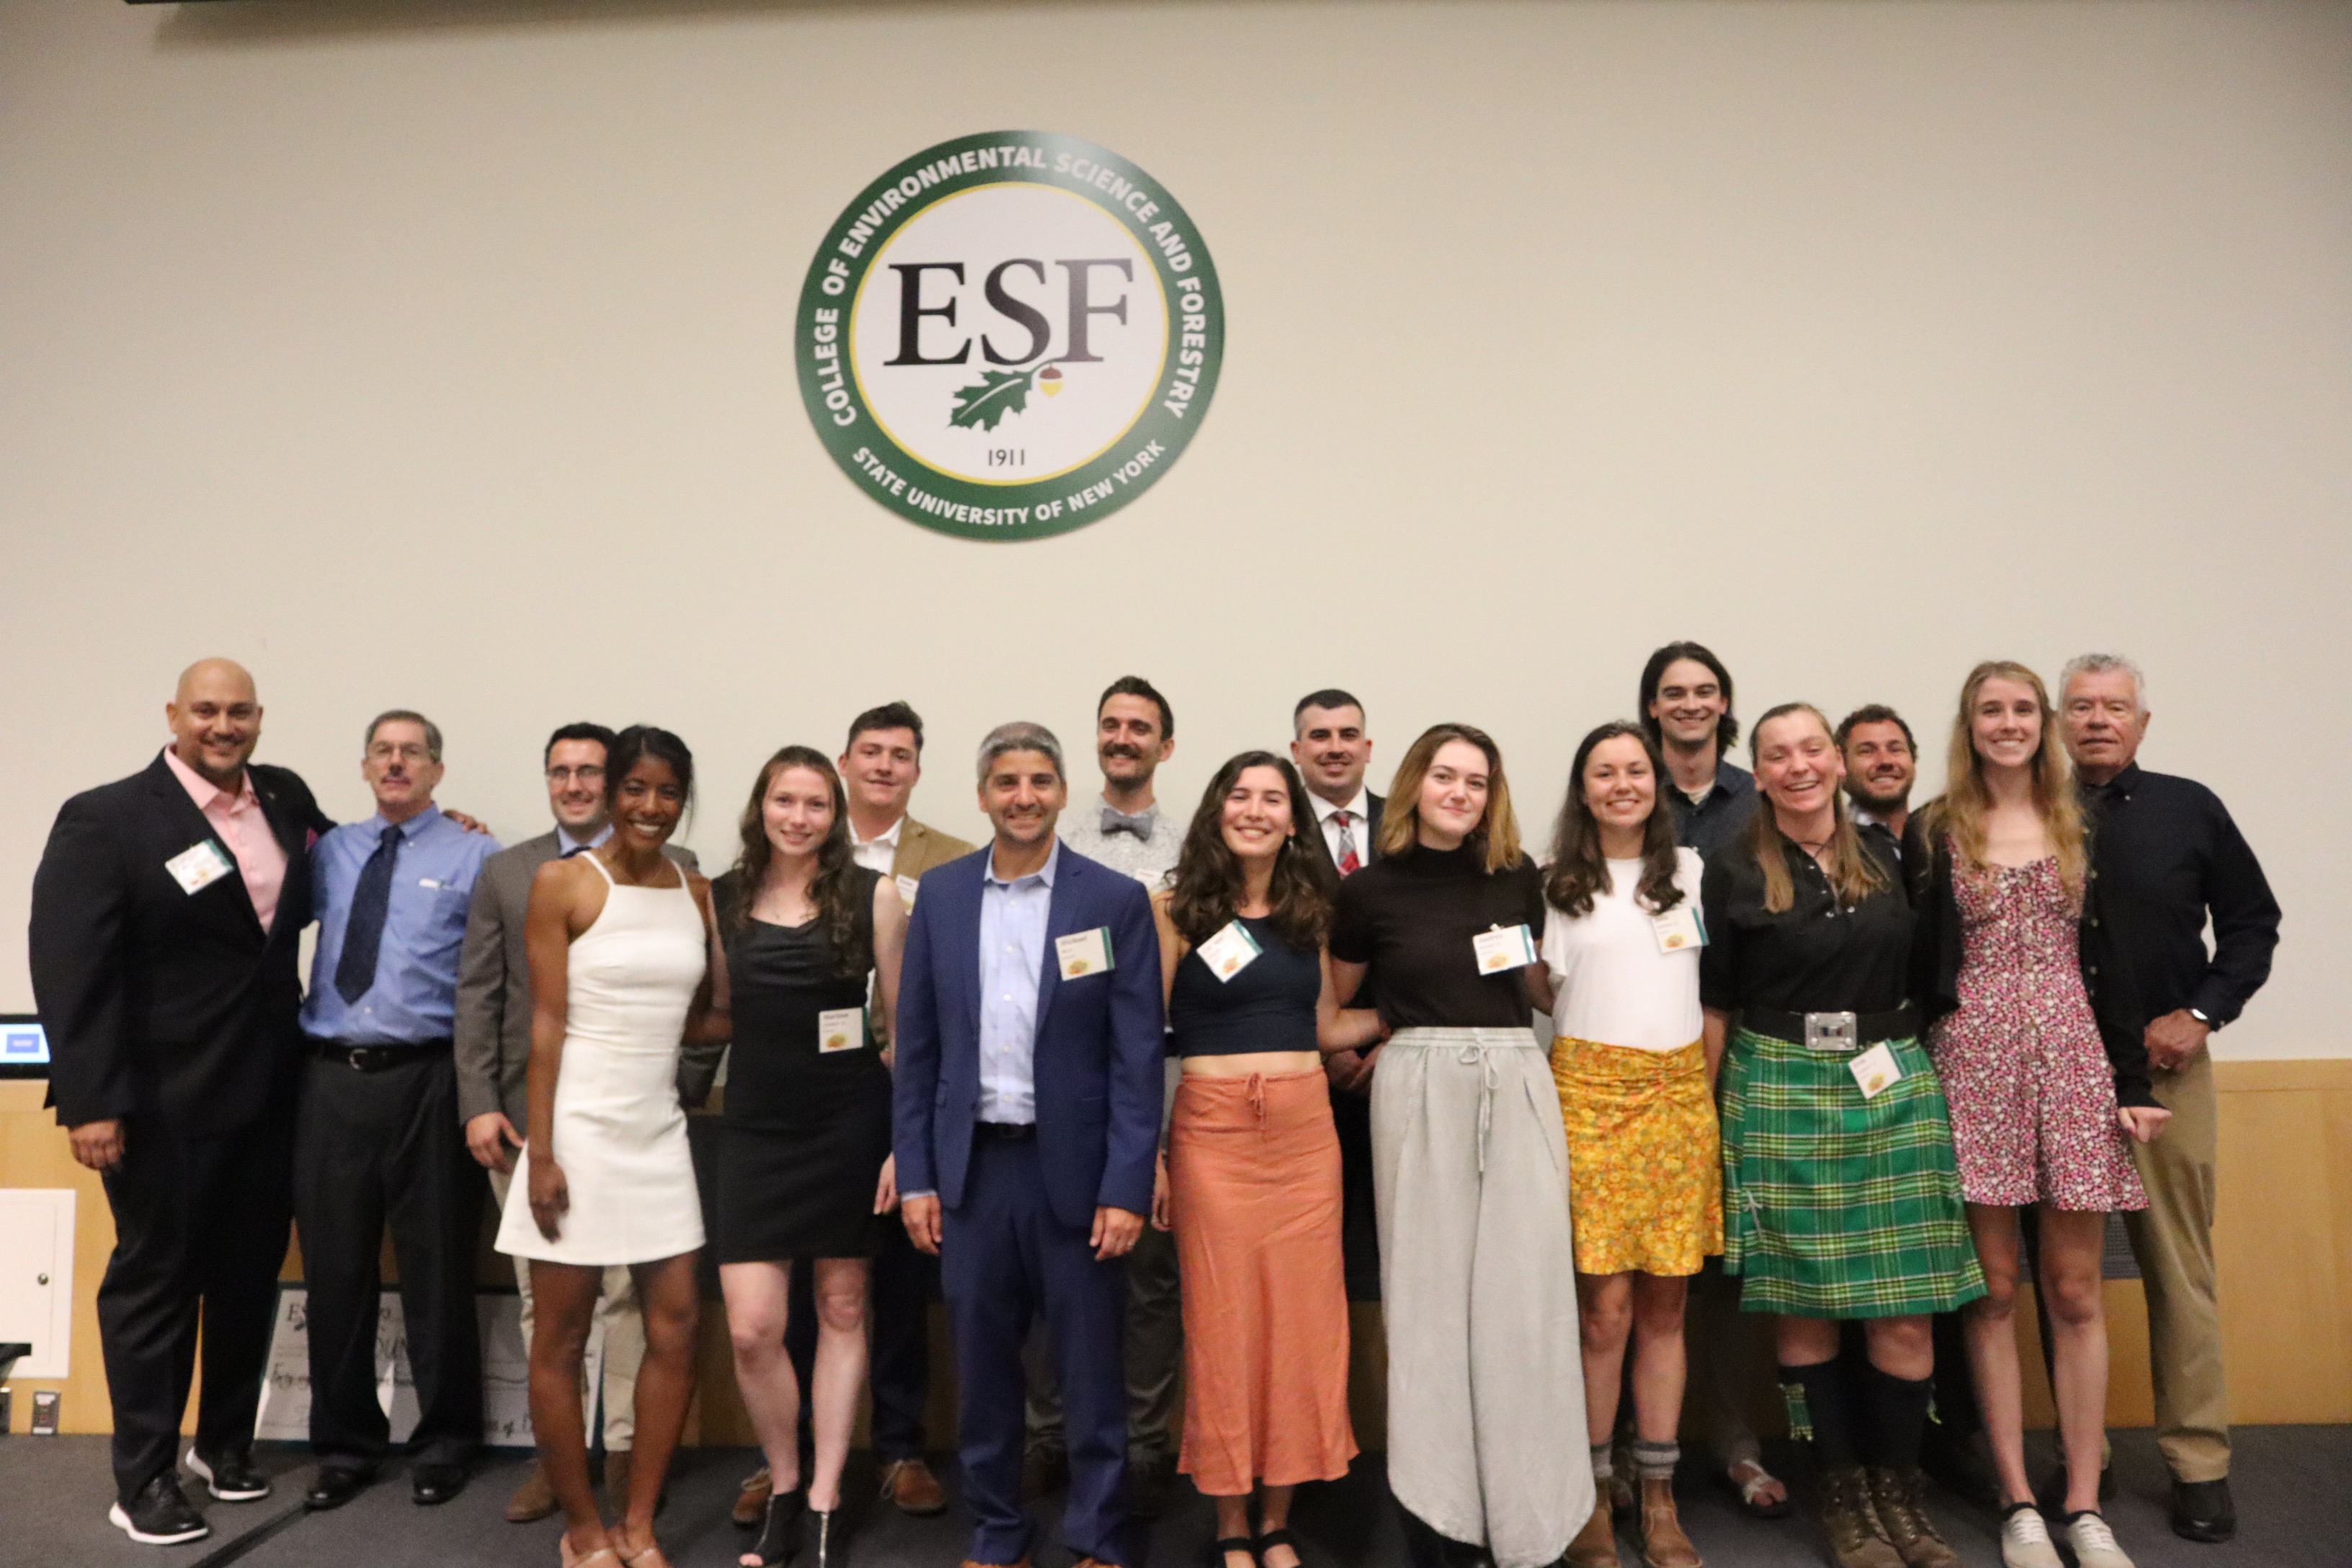 Eighteen people standing together for a group picture in front of ESF logo.